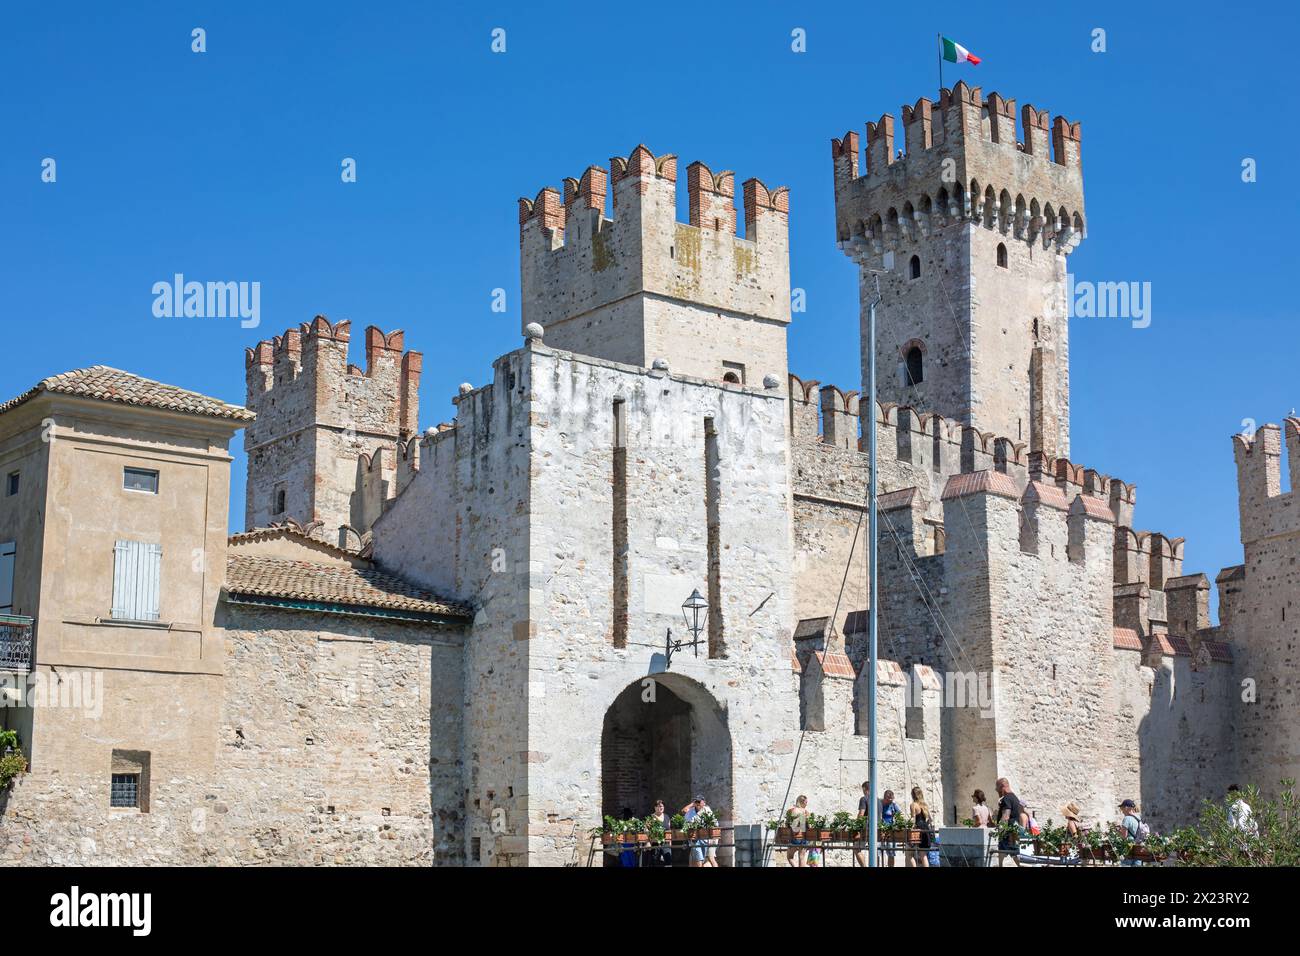 The Scaliger Castle in Sirmione, Lake Garda, Italy Stock Photo